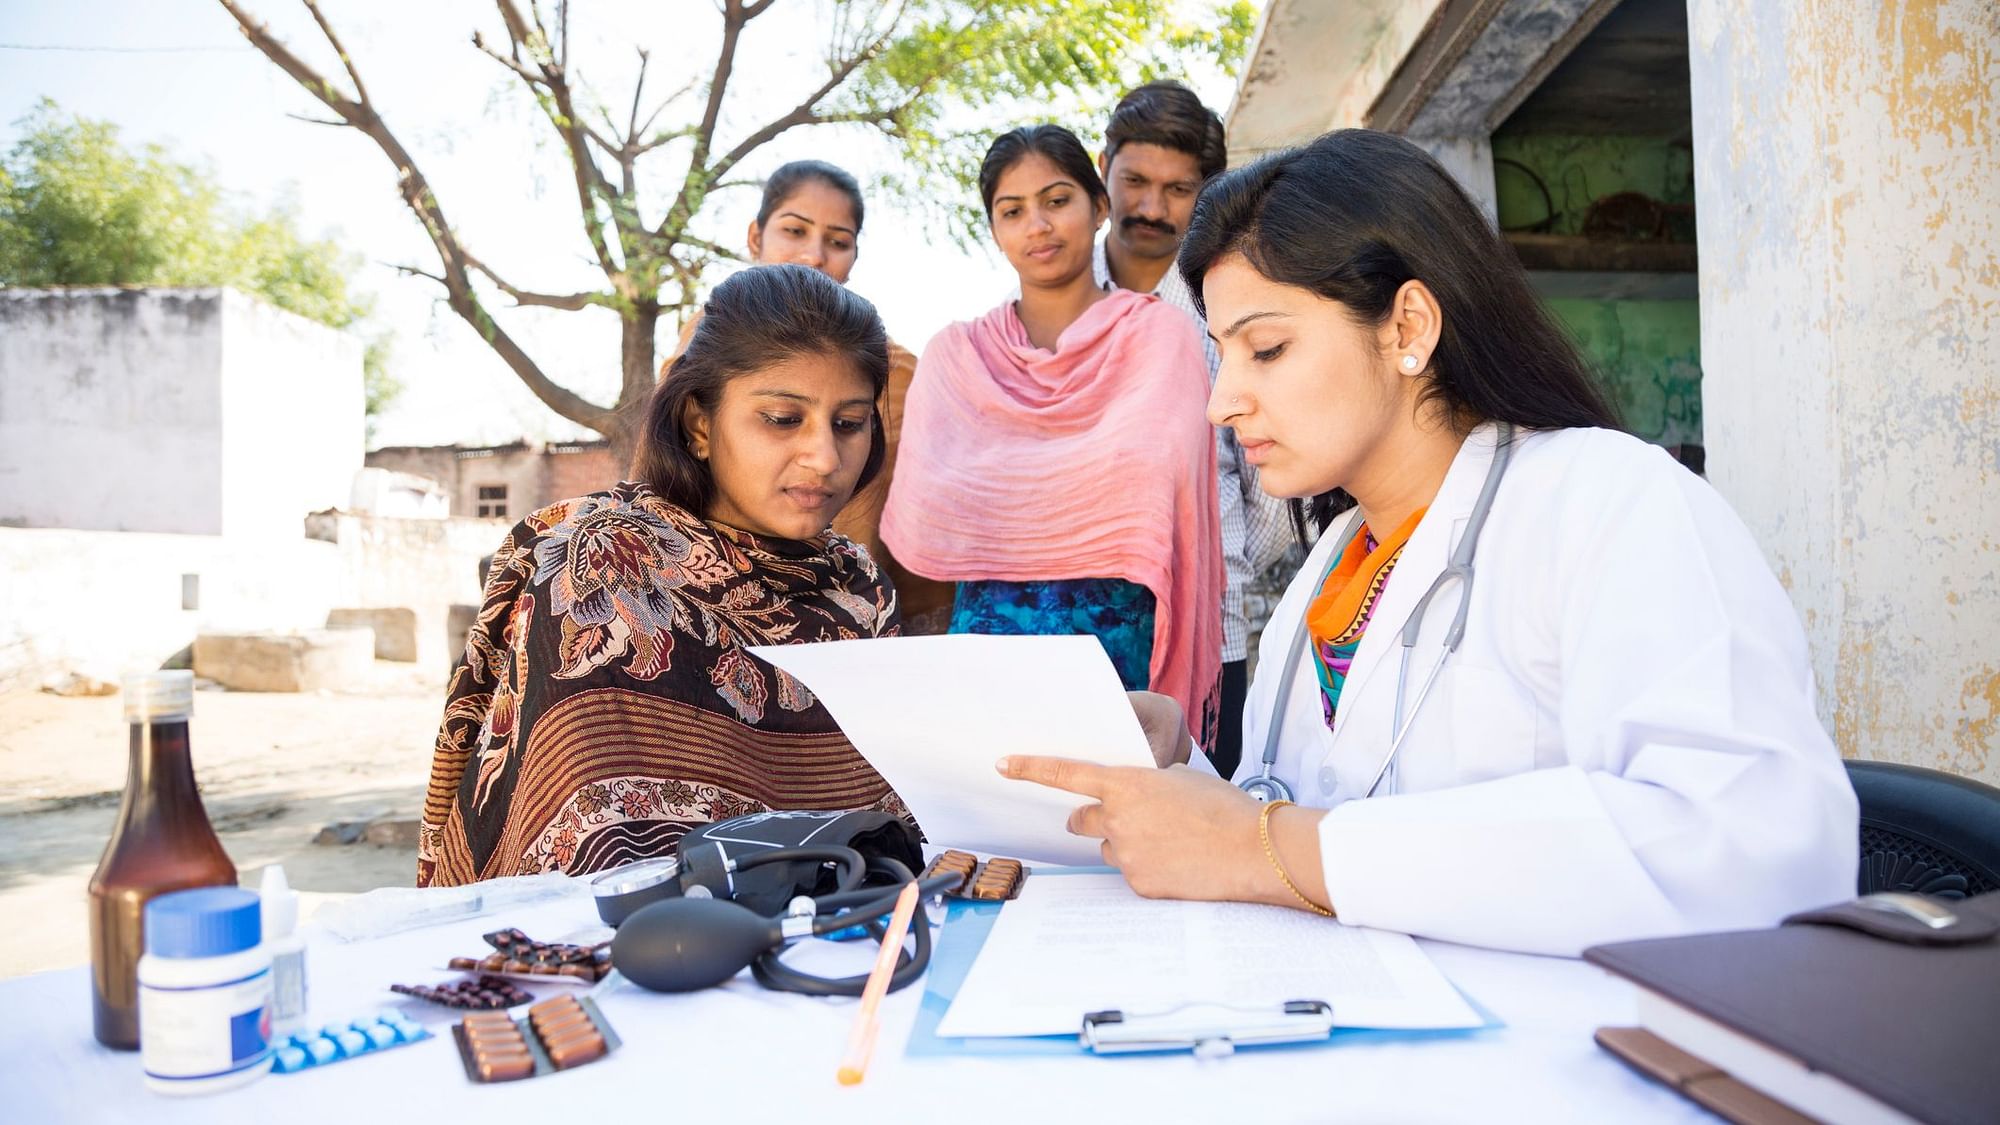 As the year ends, did India meet its healthcare goals?